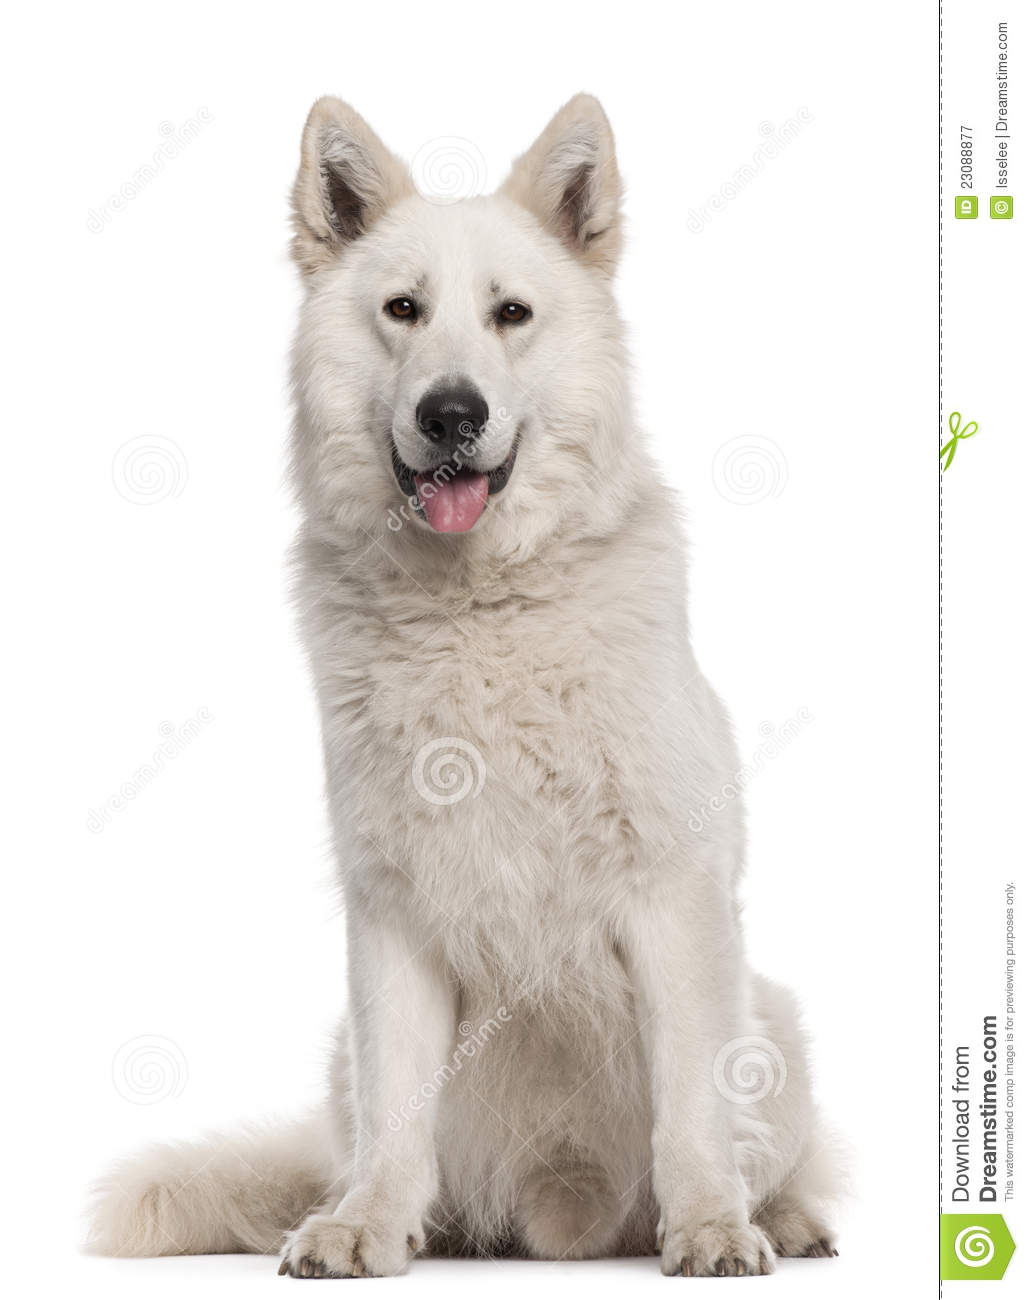 Berger Blanc Suisse clipart #1, Download drawings